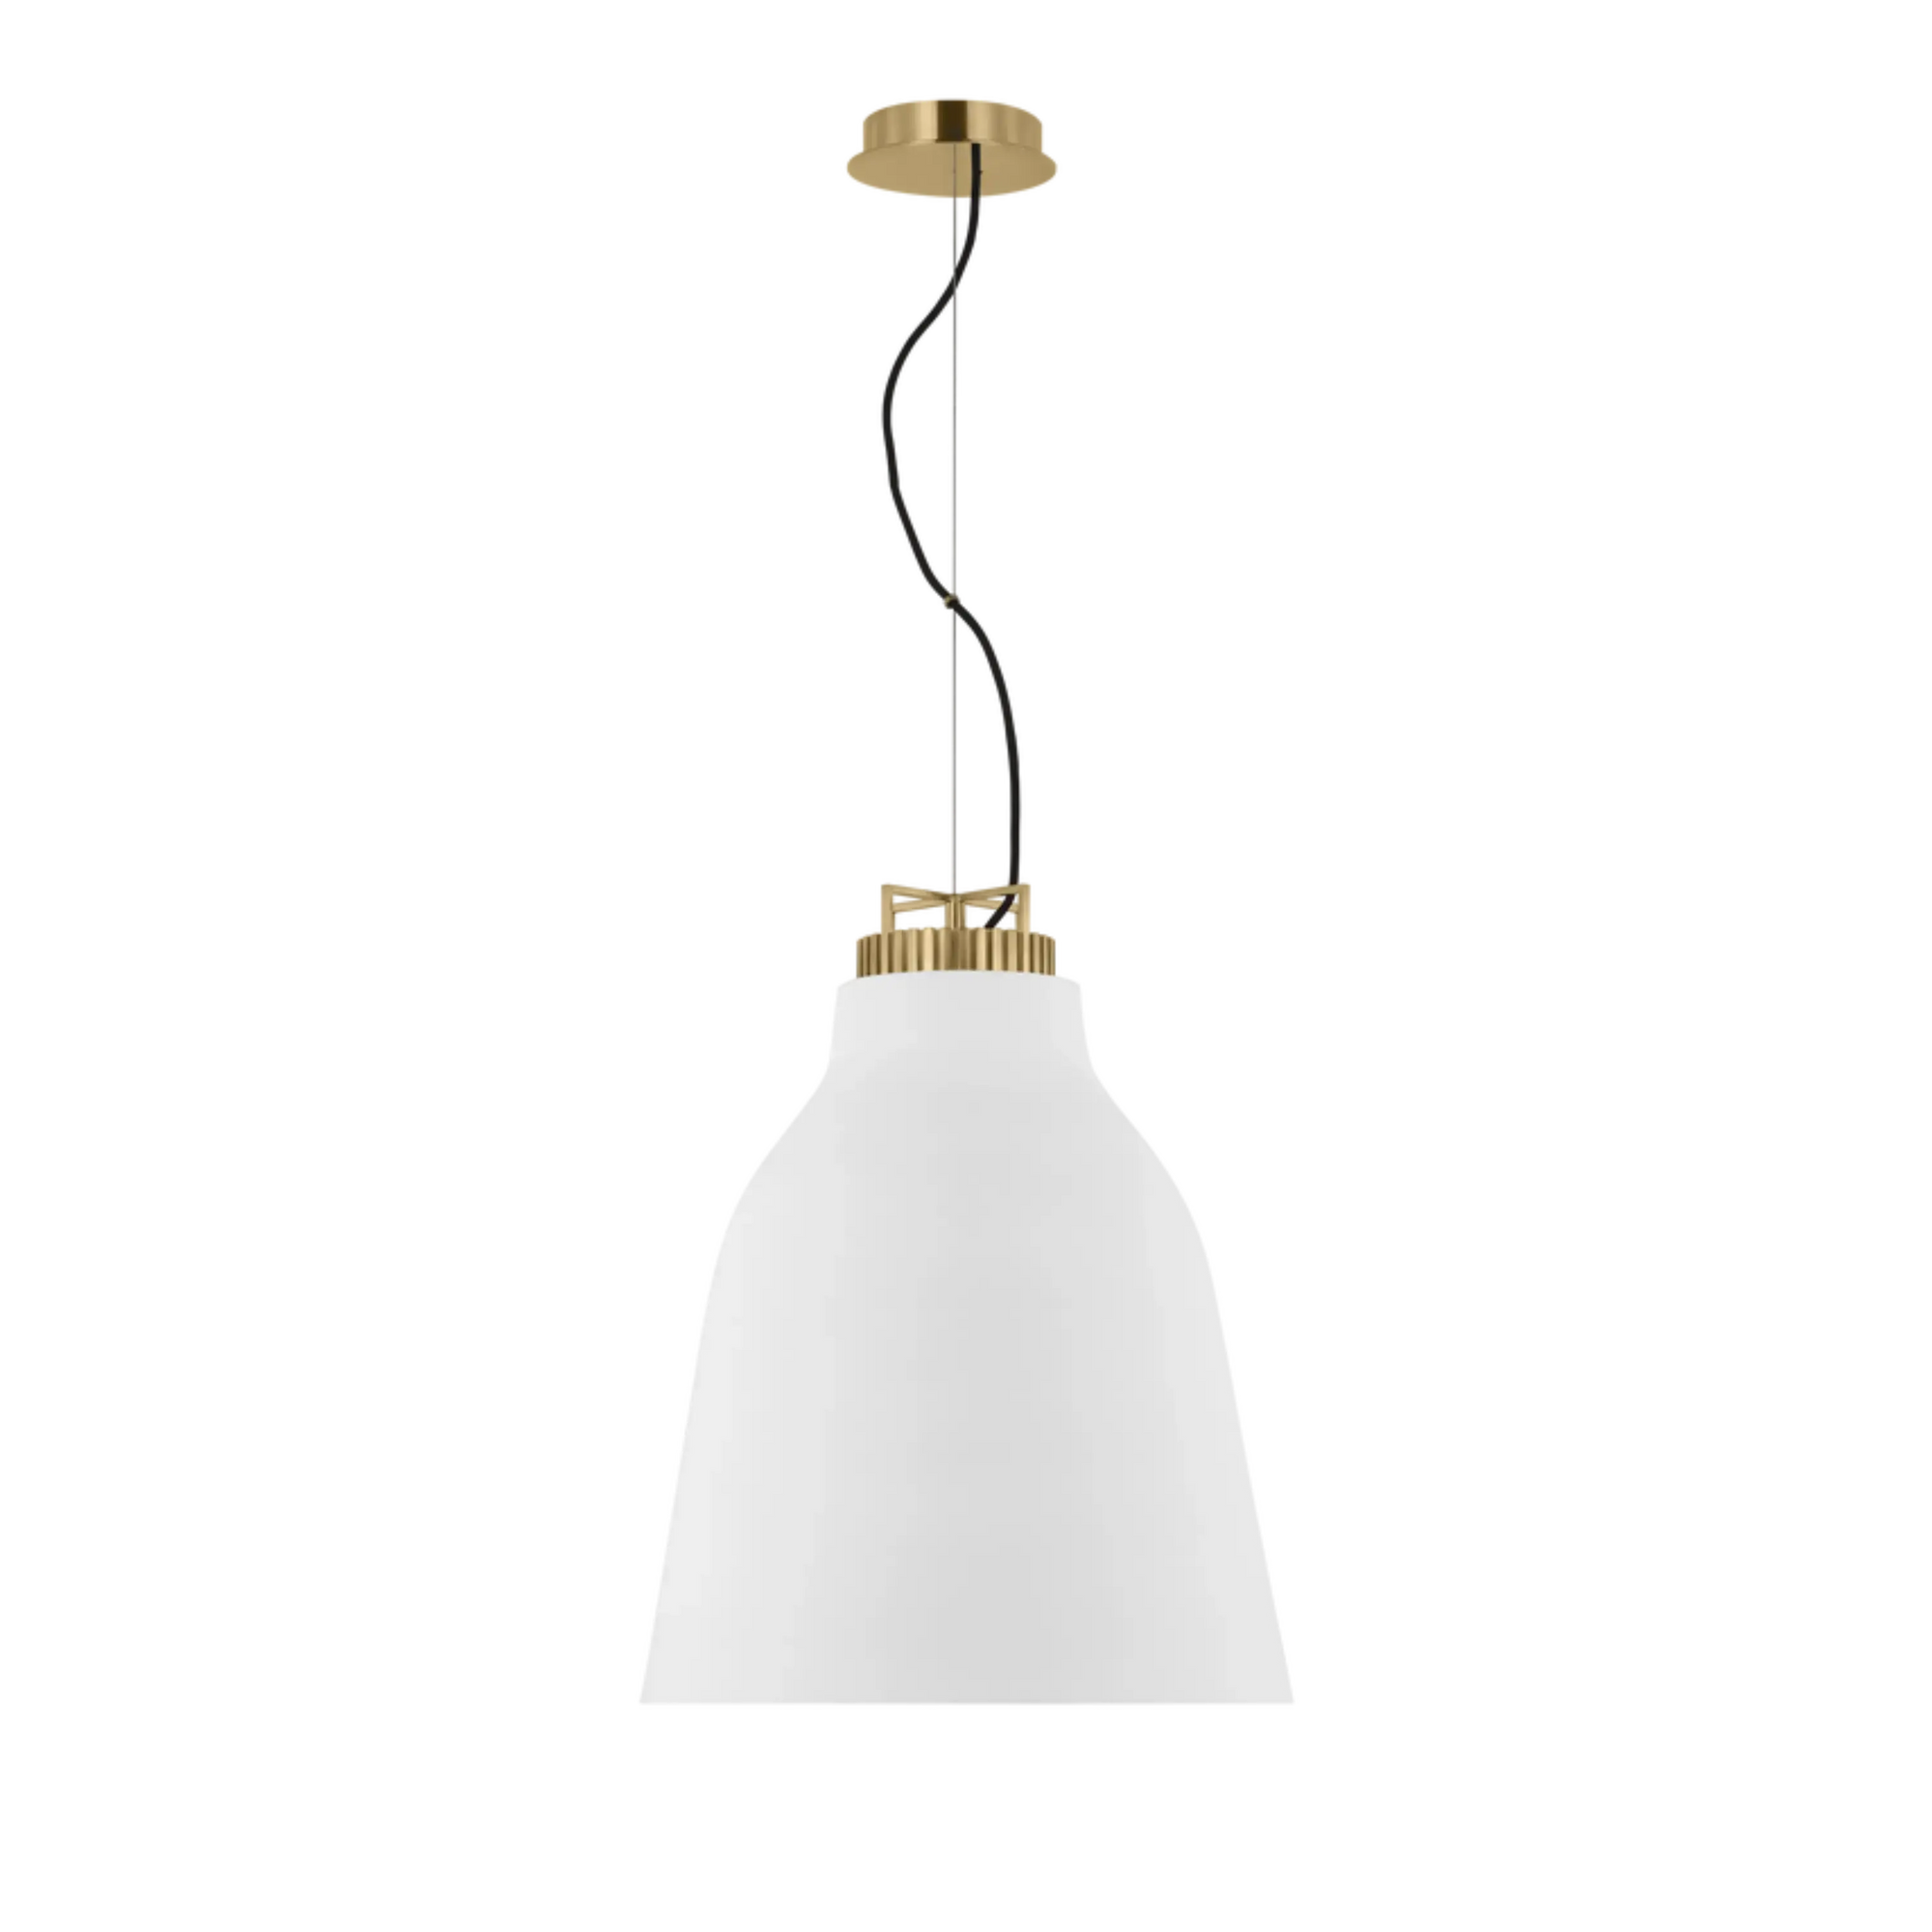 Inspired by the industrial age, the Forge Tall Pendant is modernized through its contemporary elements.